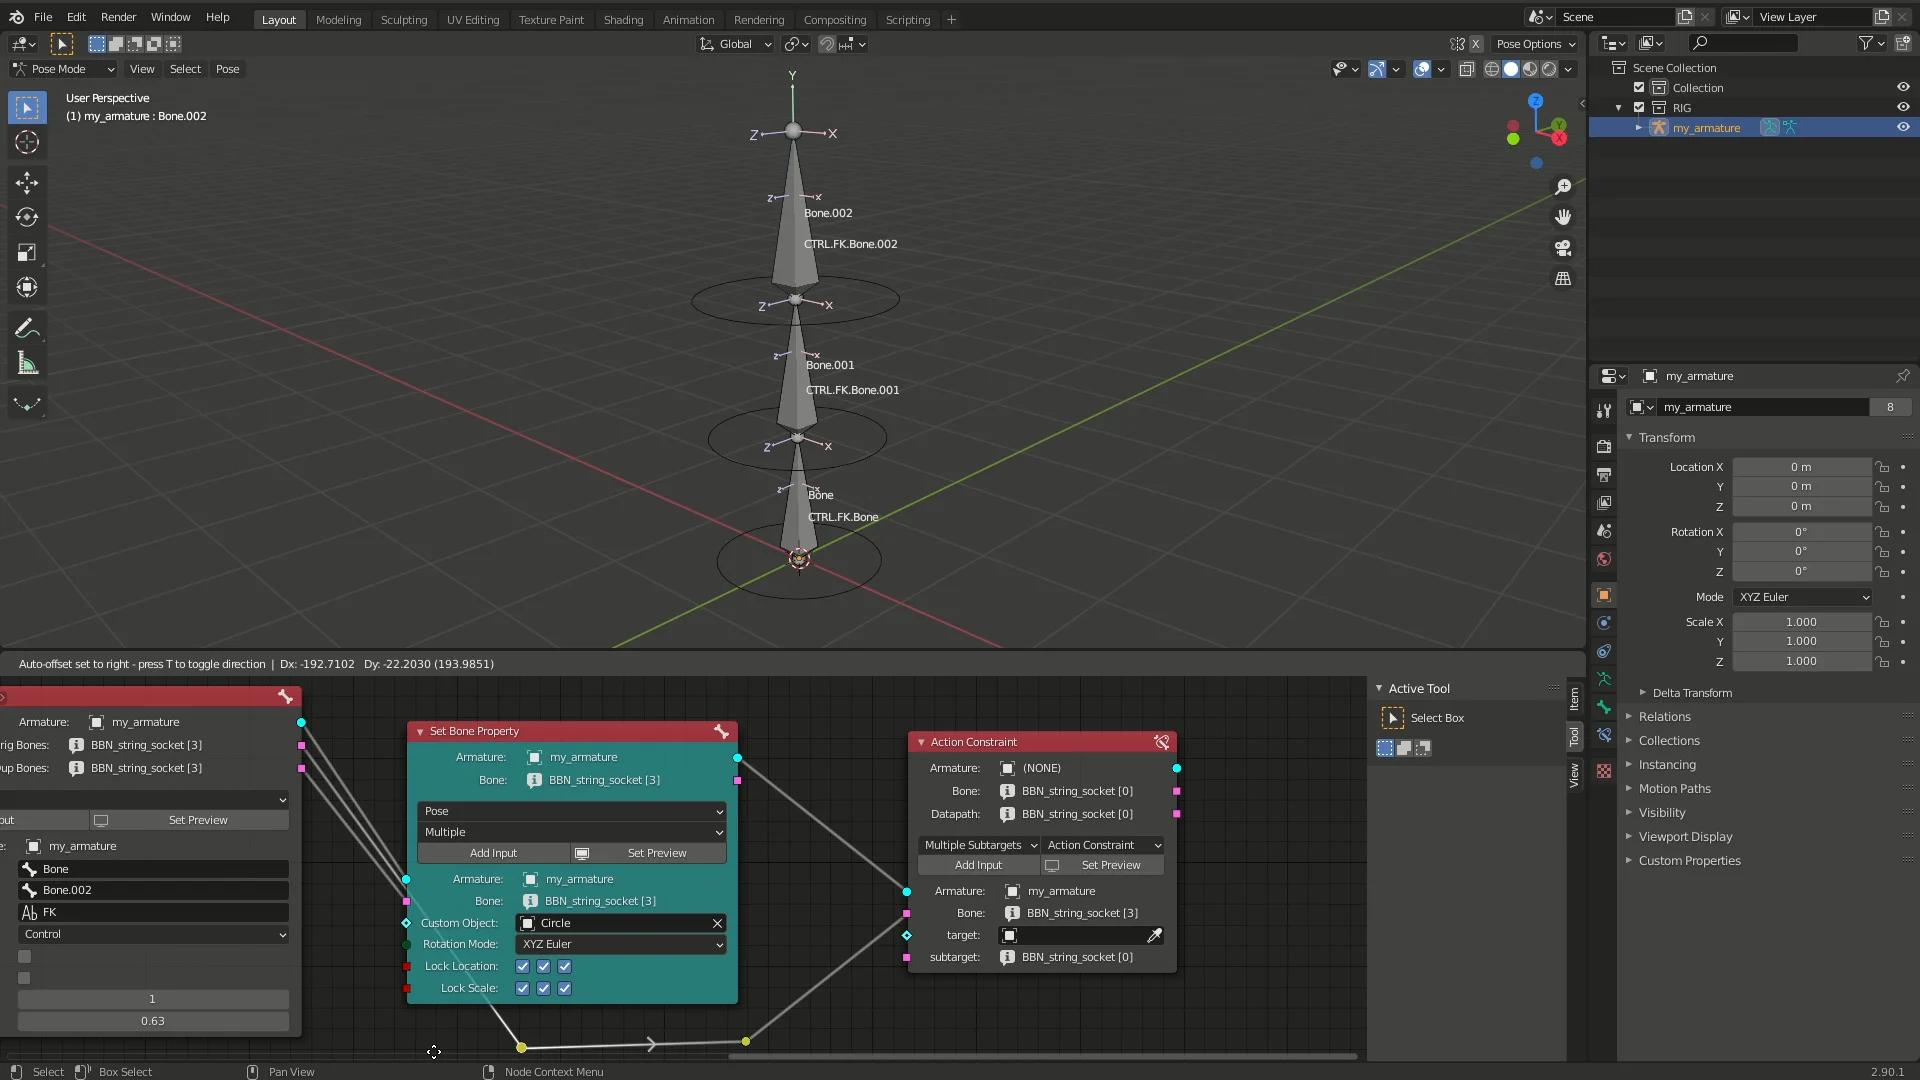 Rigging nodes - Released Scripts and Themes - Blender Artists Community